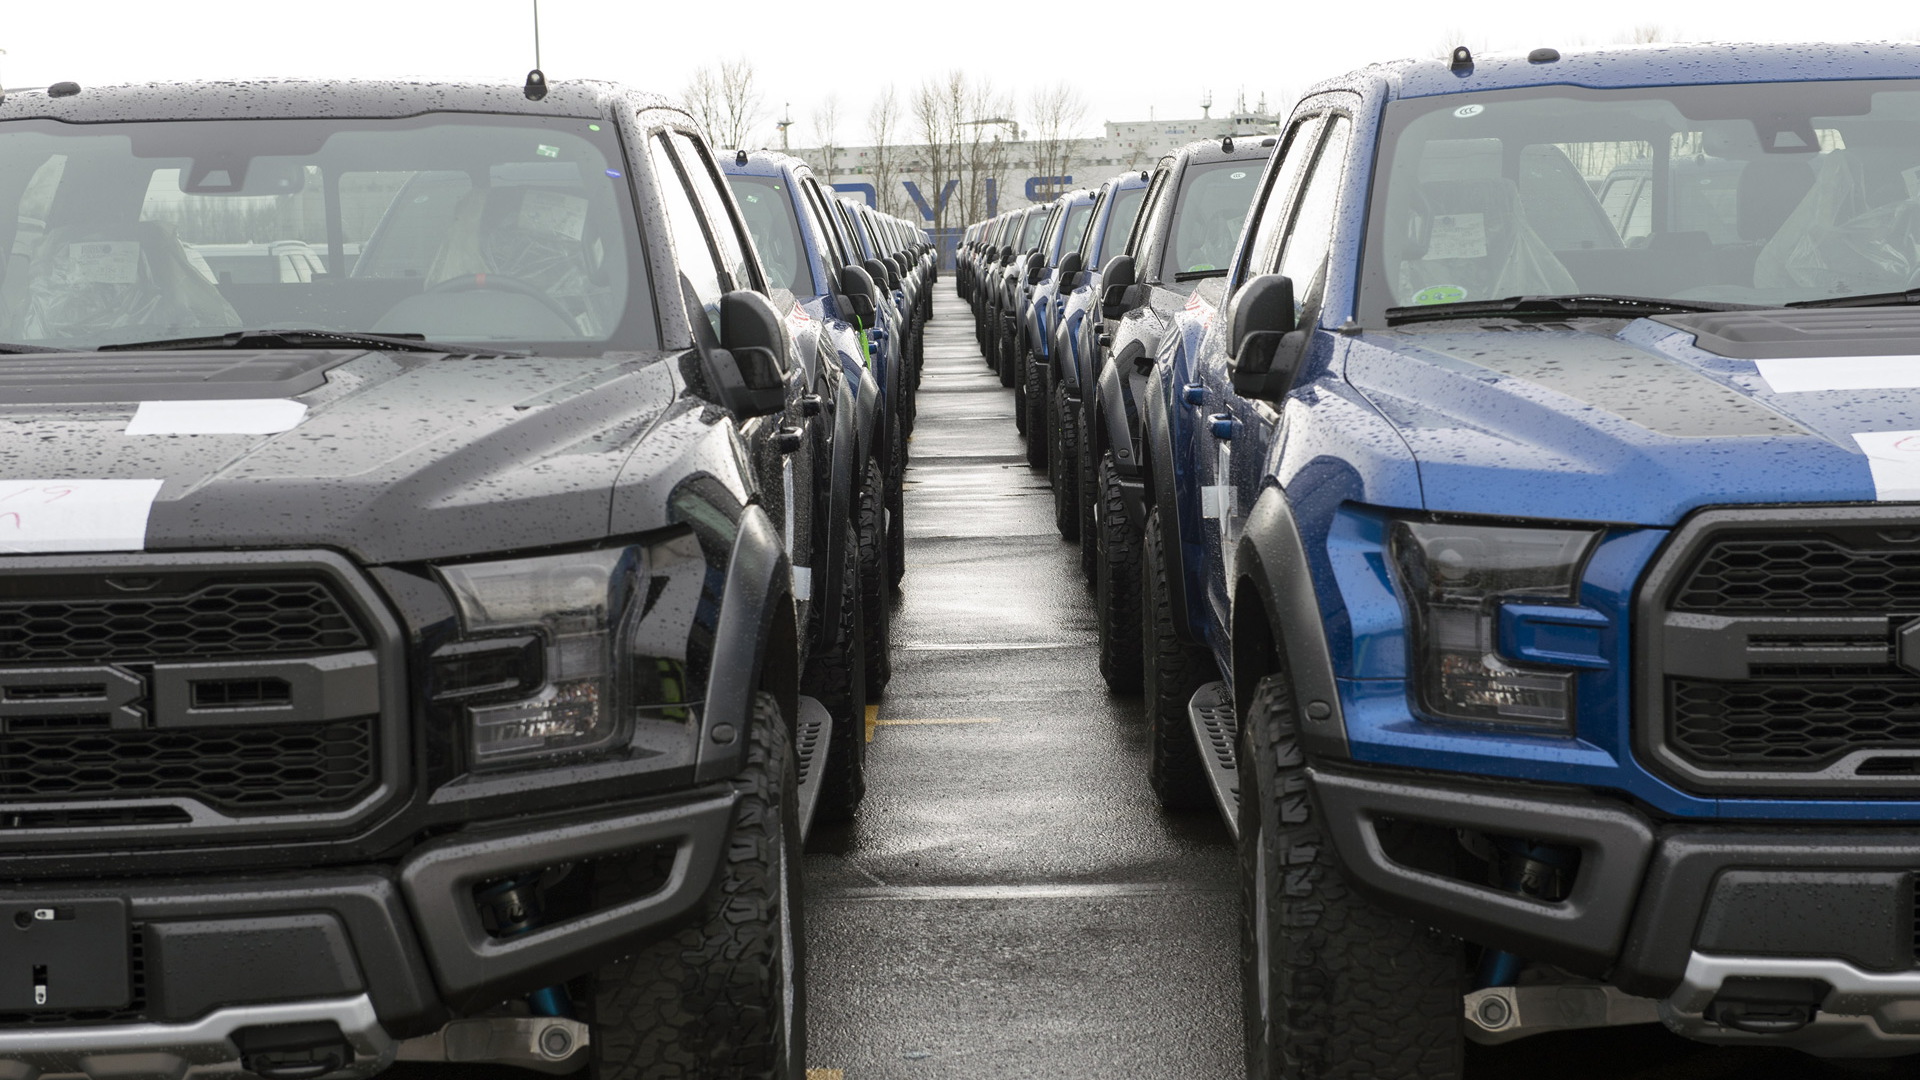 2017 Ford F-150 Raptor SuperCrews being shipped to China